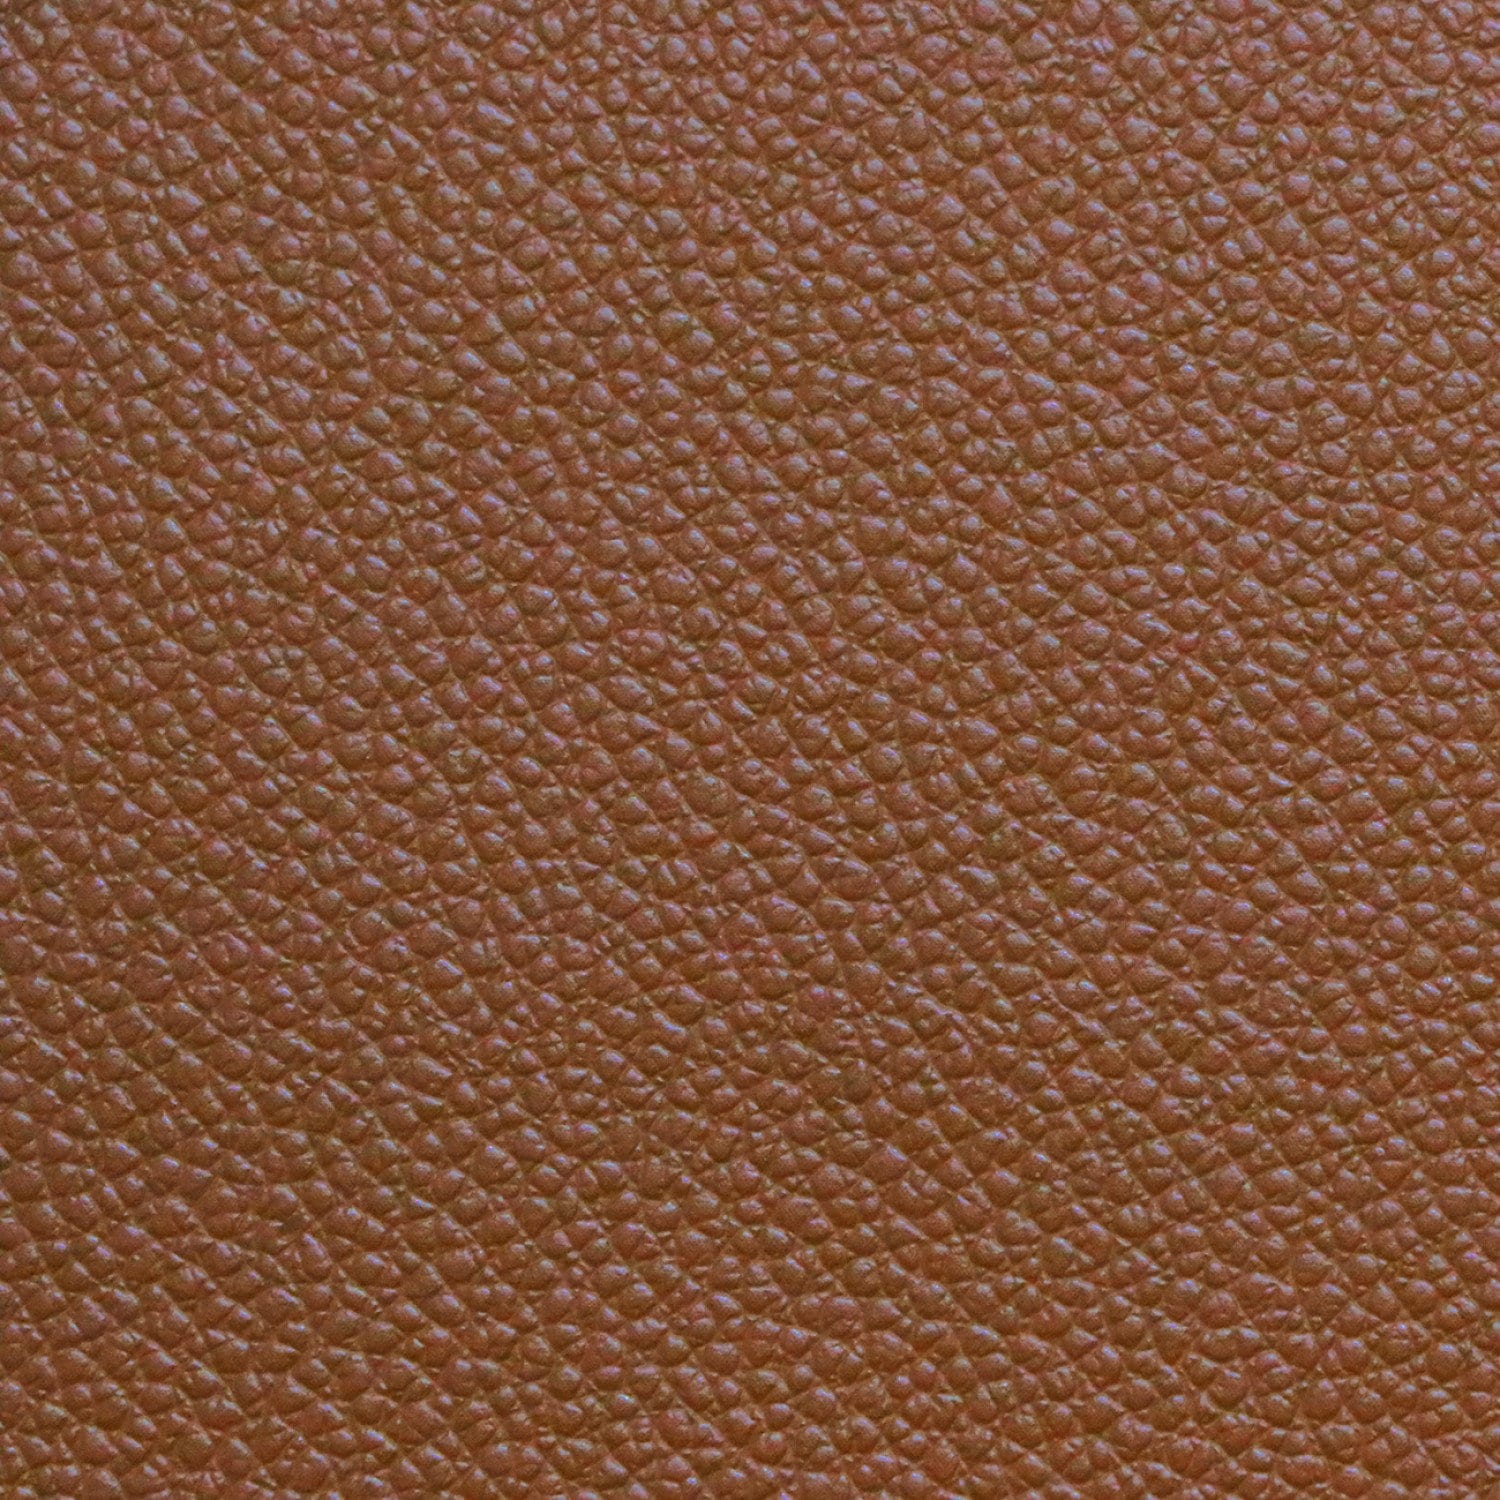 Faux Leather Fabric, Crazy Horse Leather, Fake Leather Fabric, Artificial  Leather, Sewing Leather, Craft Supply, DIY, by the Yard 